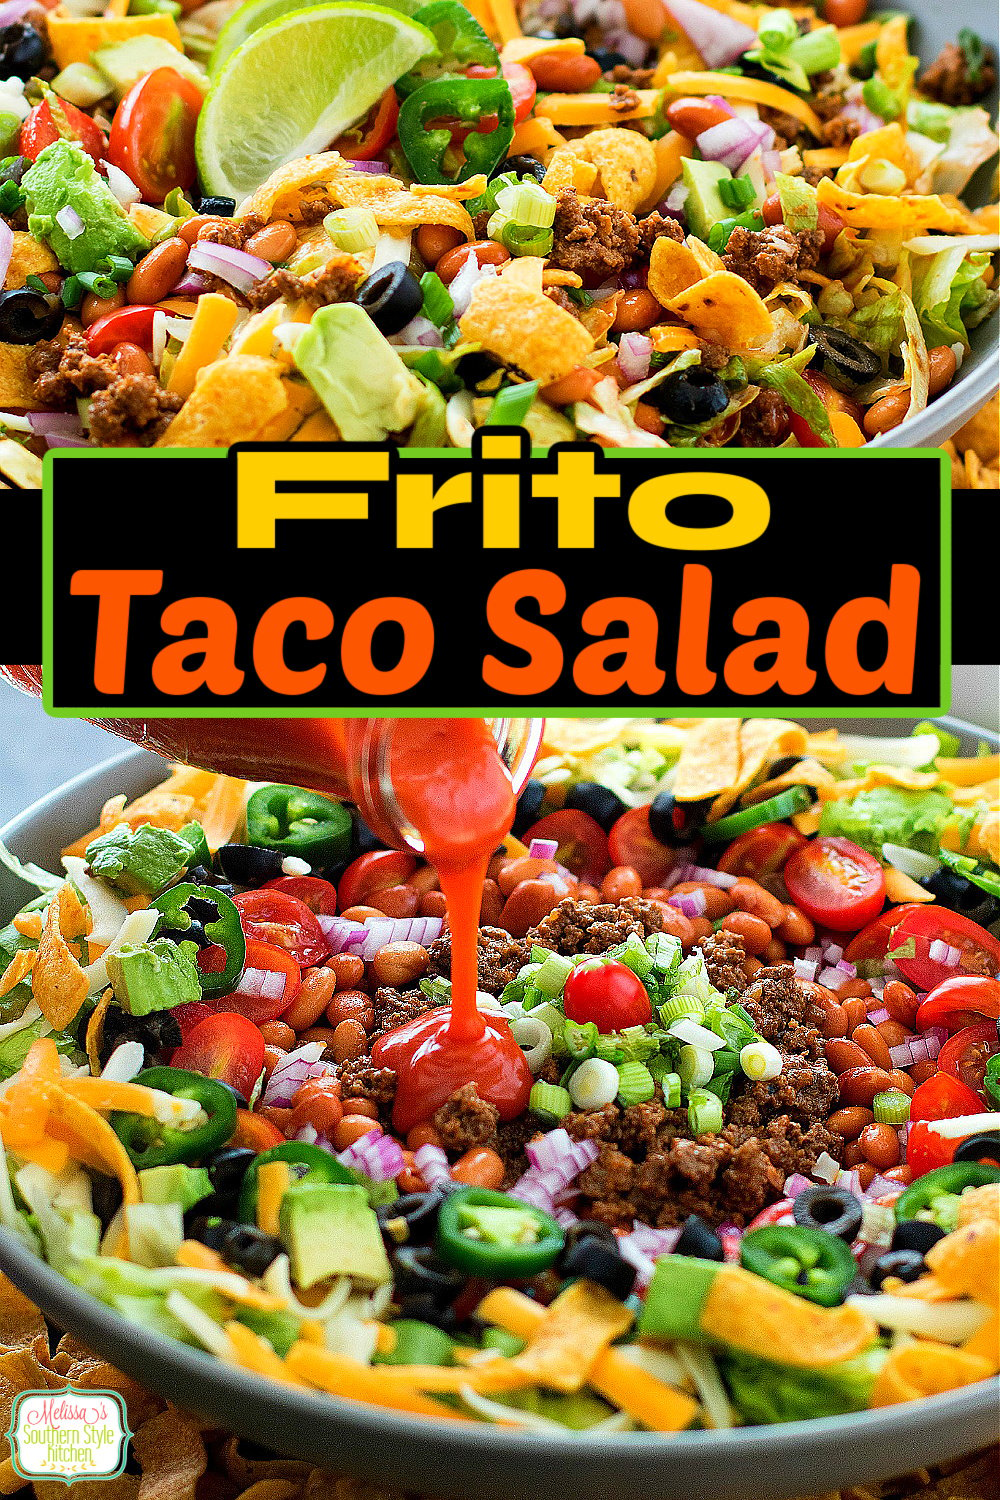 Whip-up this Frito Taco Salad for dinner and game day snacking #fritosalad #tacosalad #saladrecipes #dinnerideas #groundbeefrecipes #tacos #fritosalad #easyrecipes #southernrecipes #southernfood #melissassouthernstylekitchen via @melissasssk